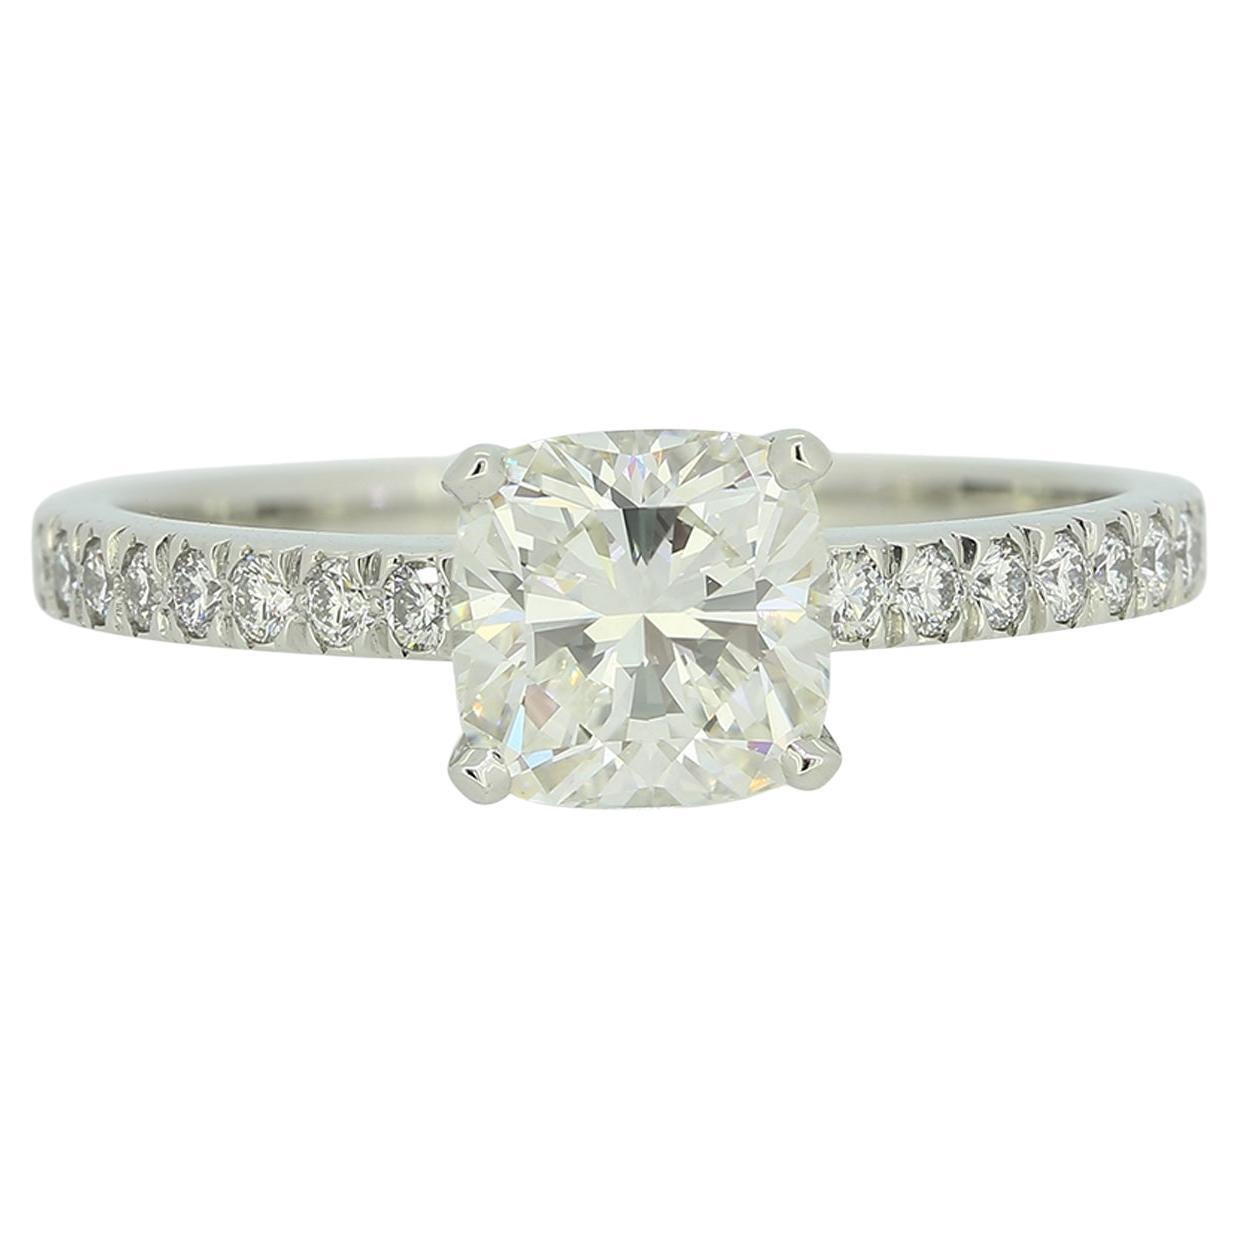 Tiffany & Co. 1.10 Carat Diamond Engagement Ring For Sale